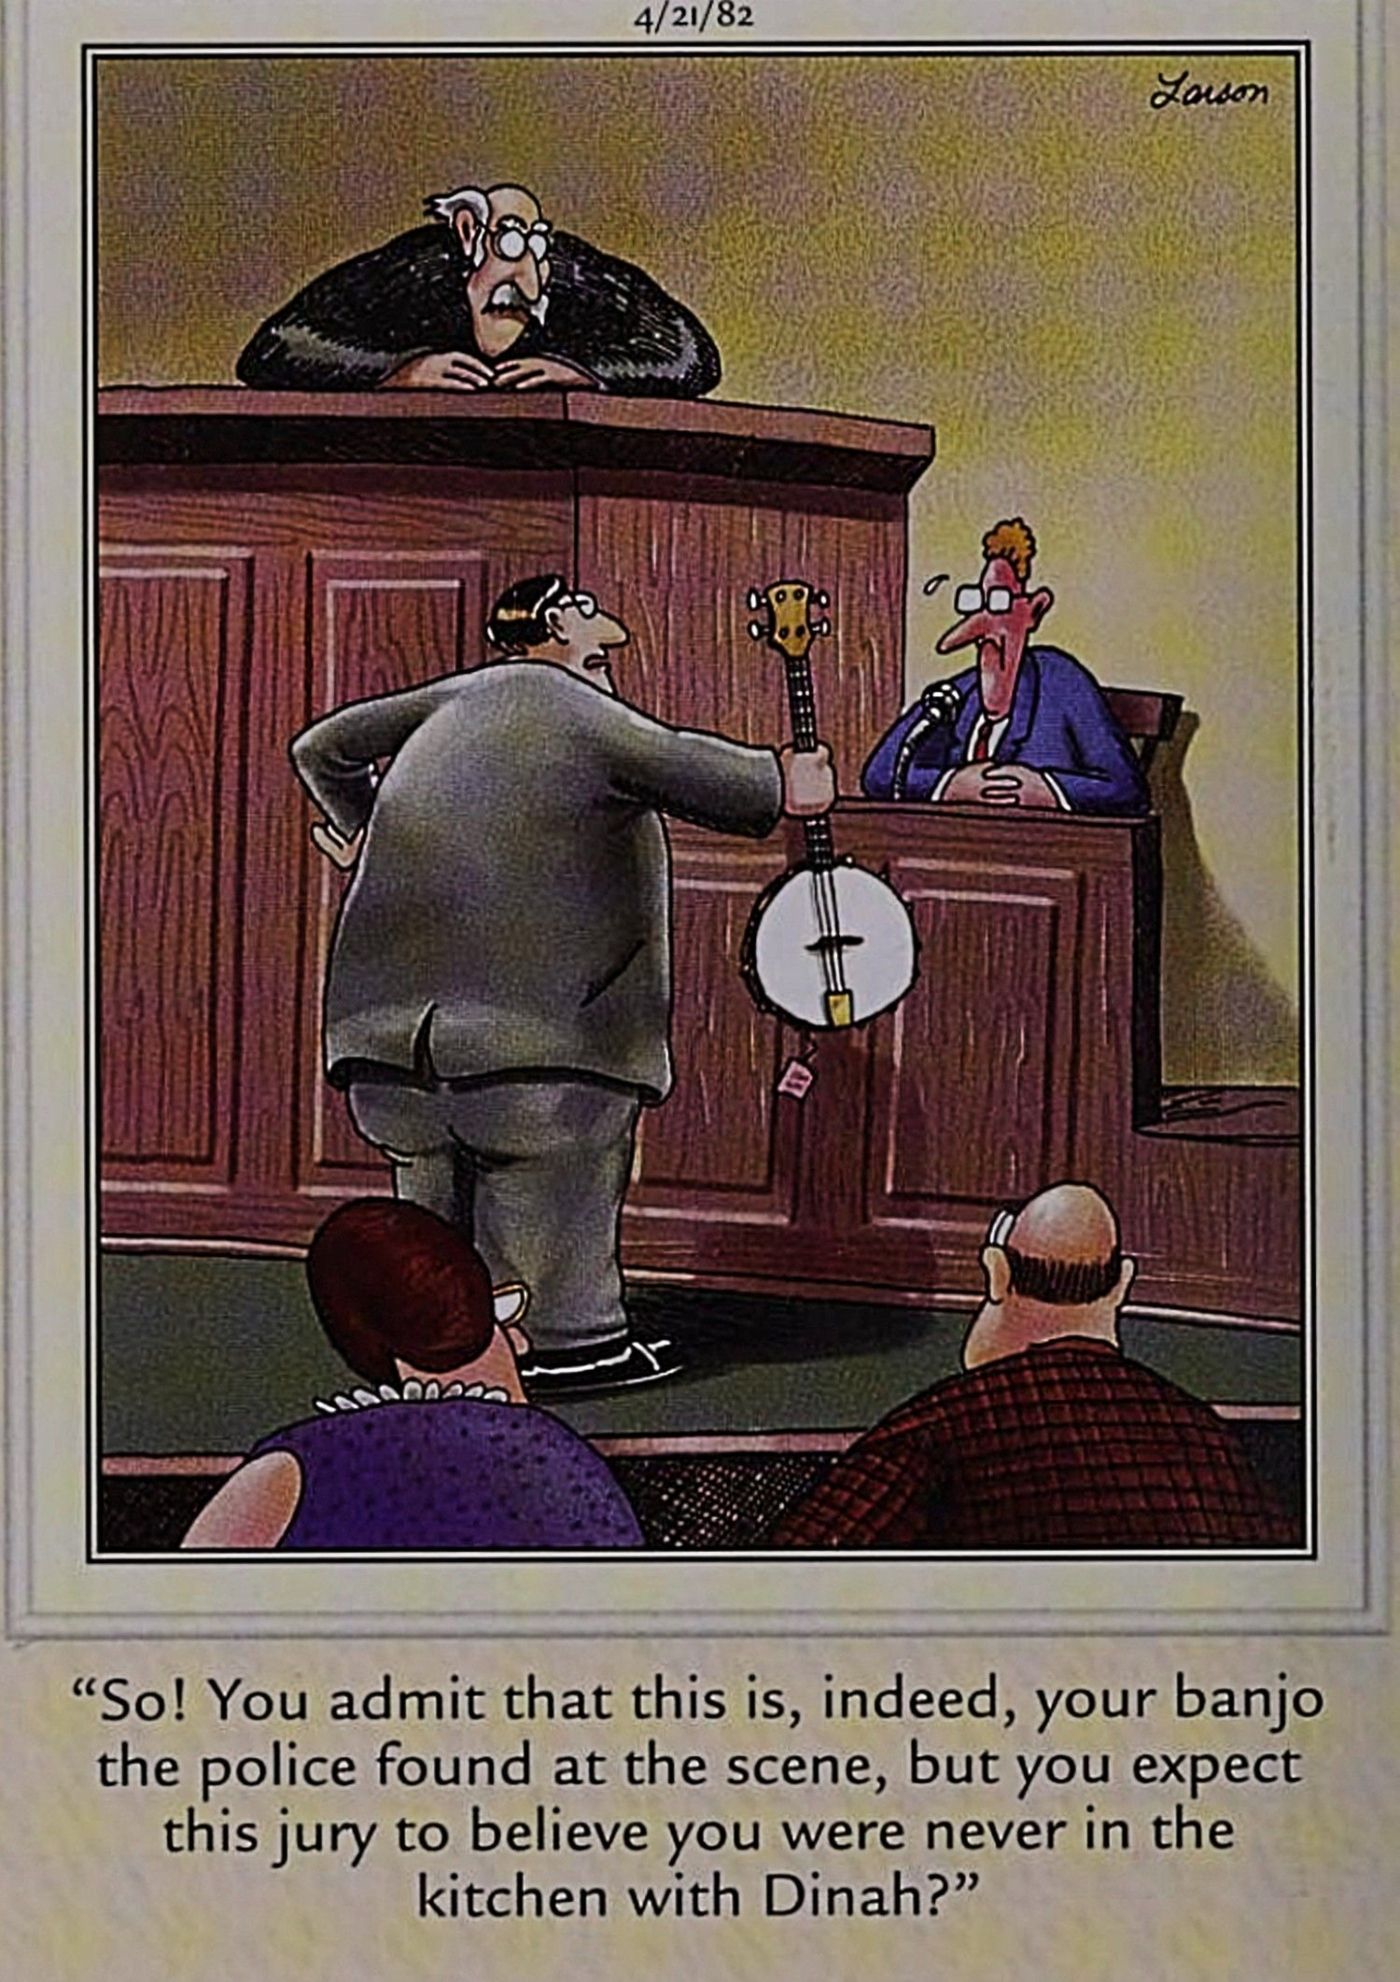 The Far Side comic featuring a courtroom scene referencing the song I've Been Working on the Railroad.